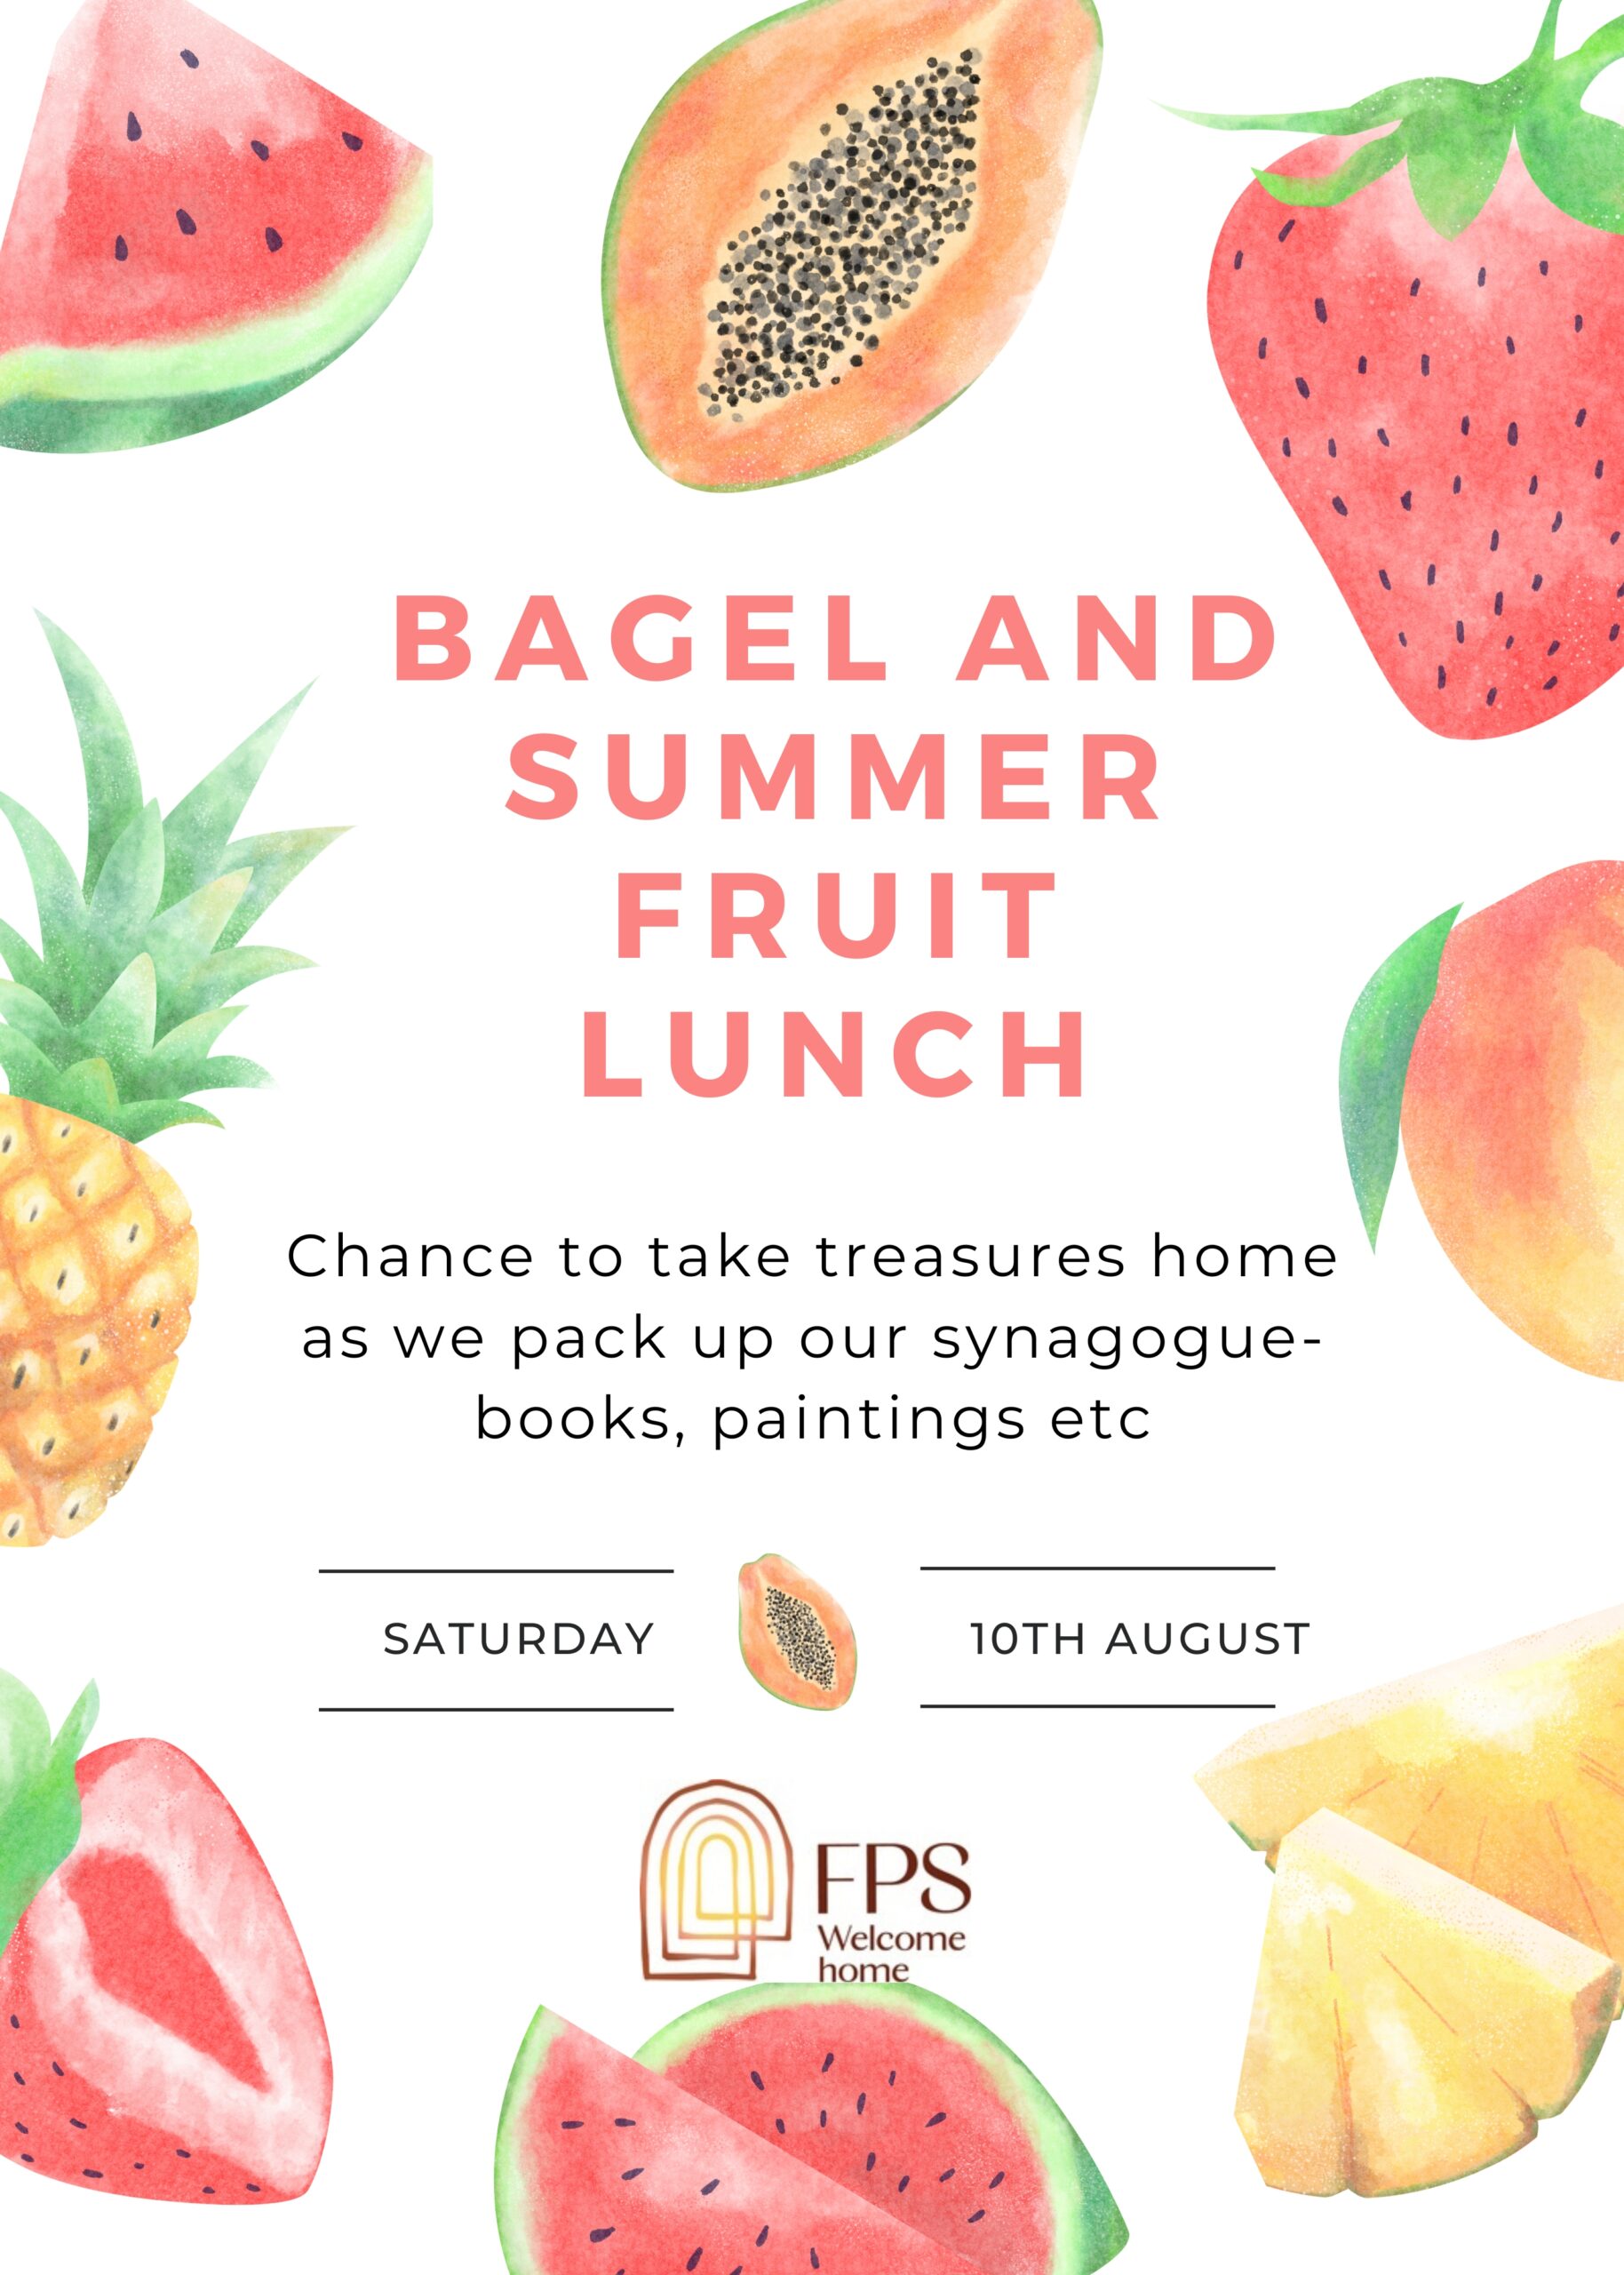 Bagel and Summer Fruit Lunch